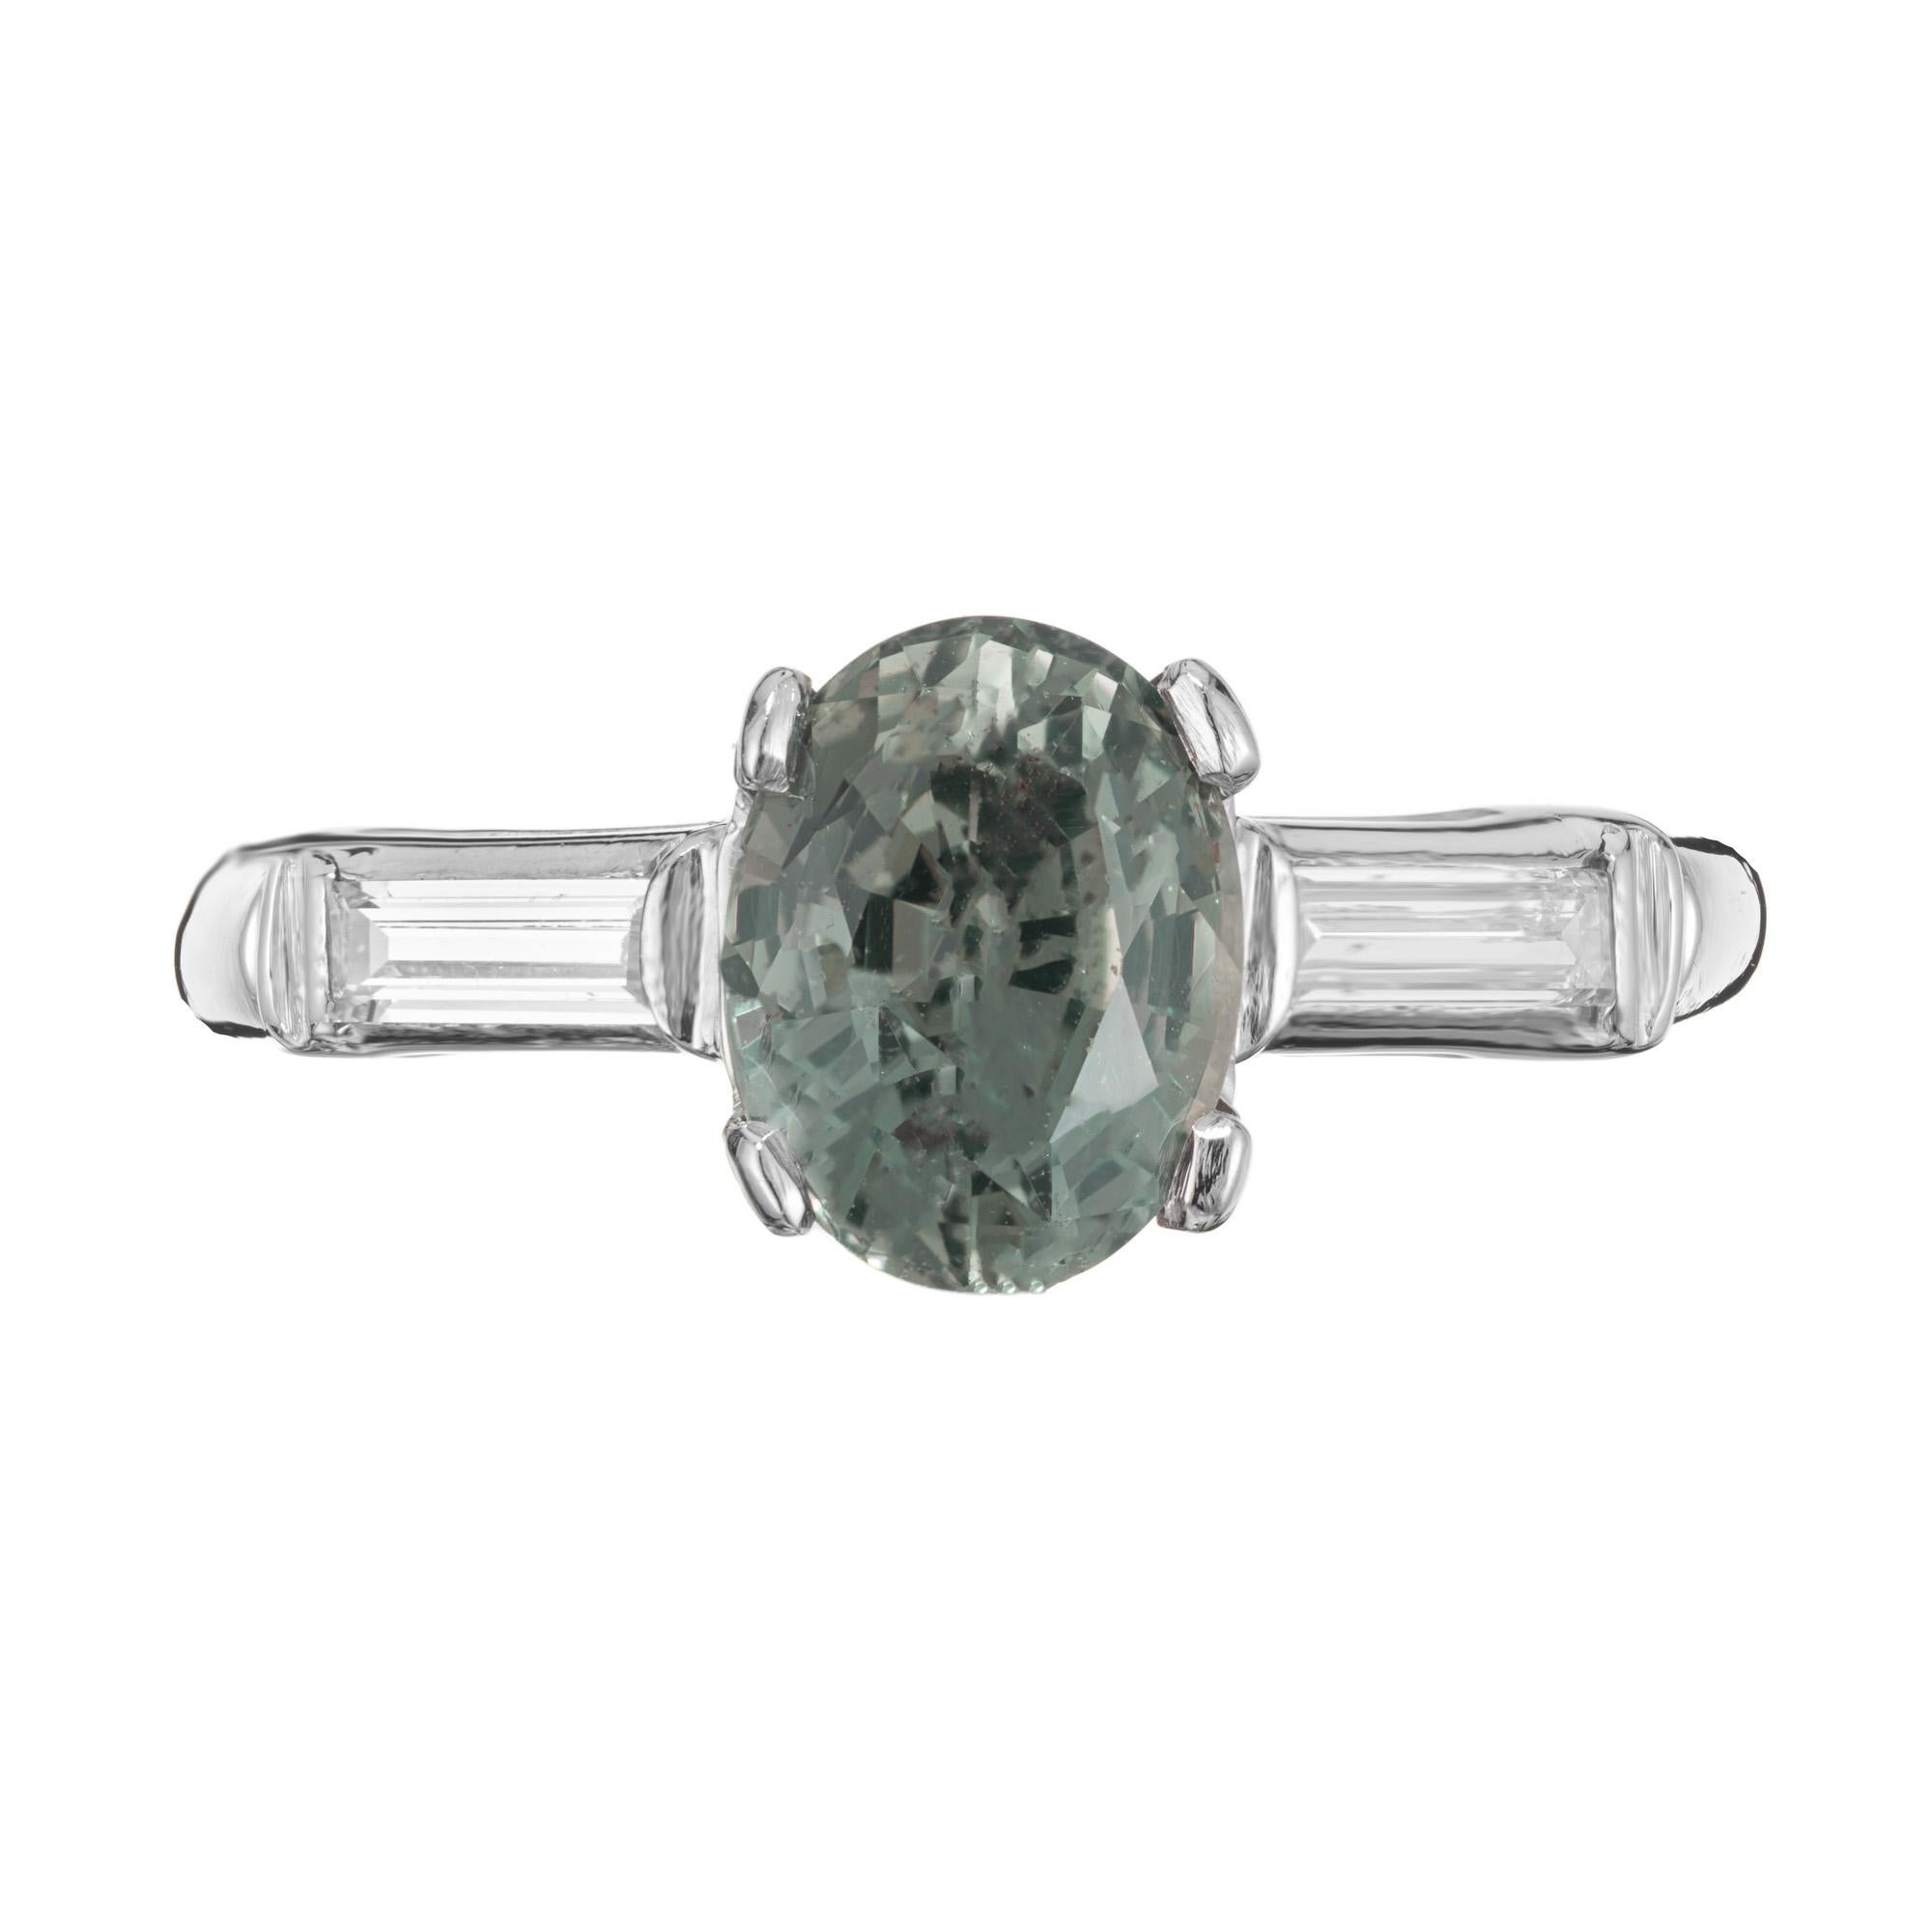 1940's late Art Deco natural green sapphire and diamond engagement ring. This beautiful rich green 1.85ct oval center sapphire is certified by the GIA as natural, no heat, green with a hint of blue. Mounted in a platinum original 1940's setting and